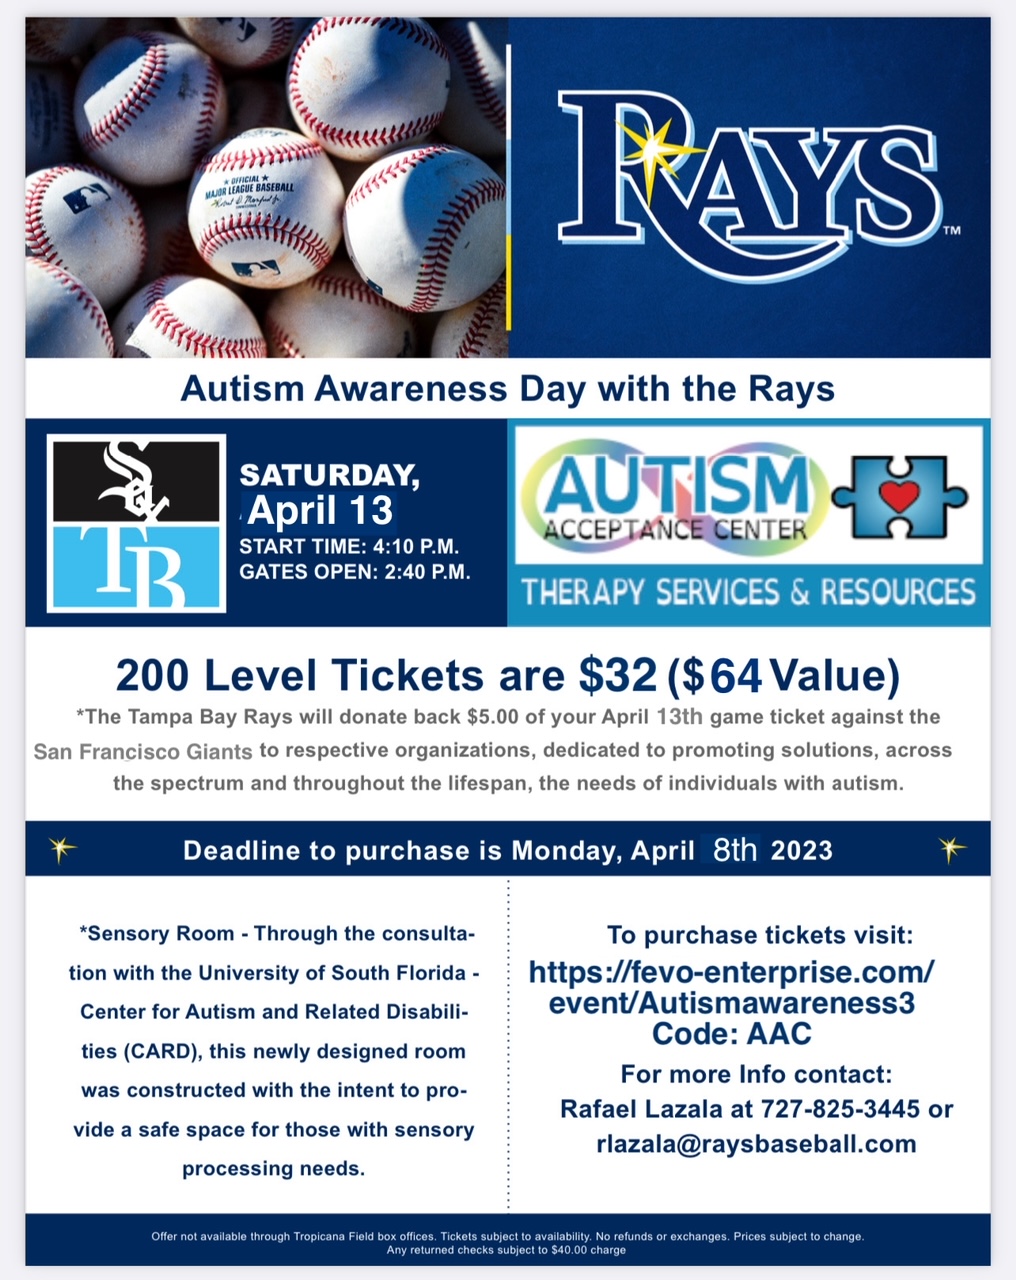 This is graphic is for Autism Awareness Day with the Rays